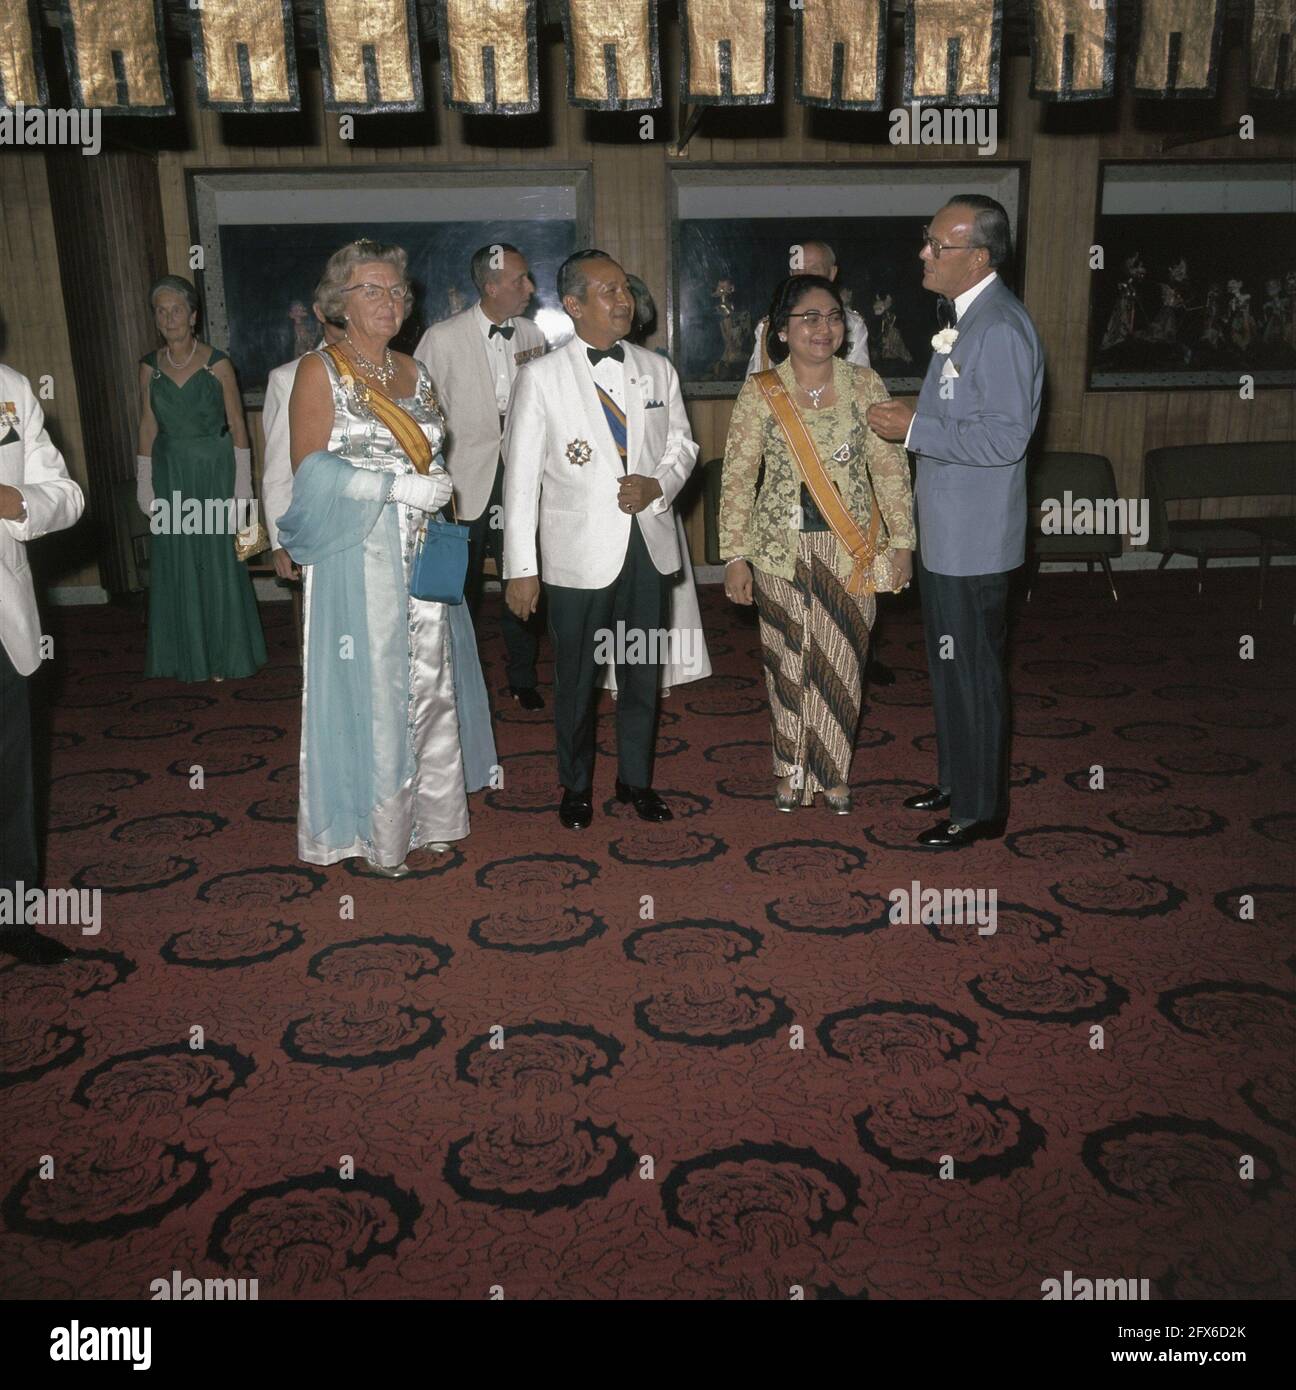 The royal couple at a gala meeting with President Suharto and his wife,  probably at the home of Ambassador Scheltema, August 27, 1971, party dress,  state visits, The Netherlands, 20th century press